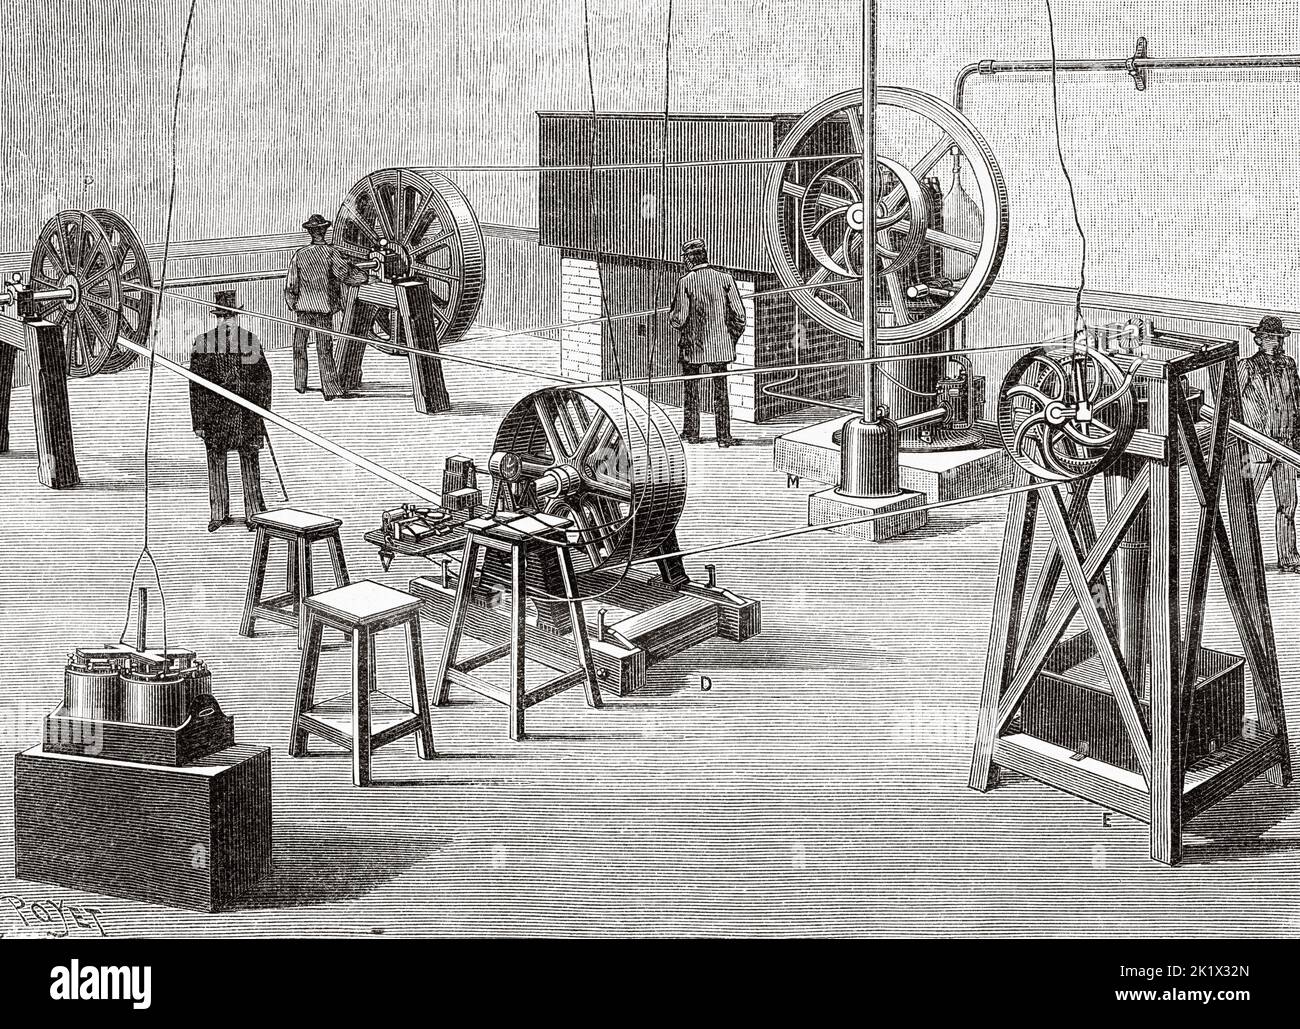 Agricultural machinery testing station in Paris, France. M 6 horsepower gas engine, P Pulley with variable simeter, D Various recording dynamometers, E Testing machine. Old 19th century engraved illustration from La Nature 1890 Stock Photo